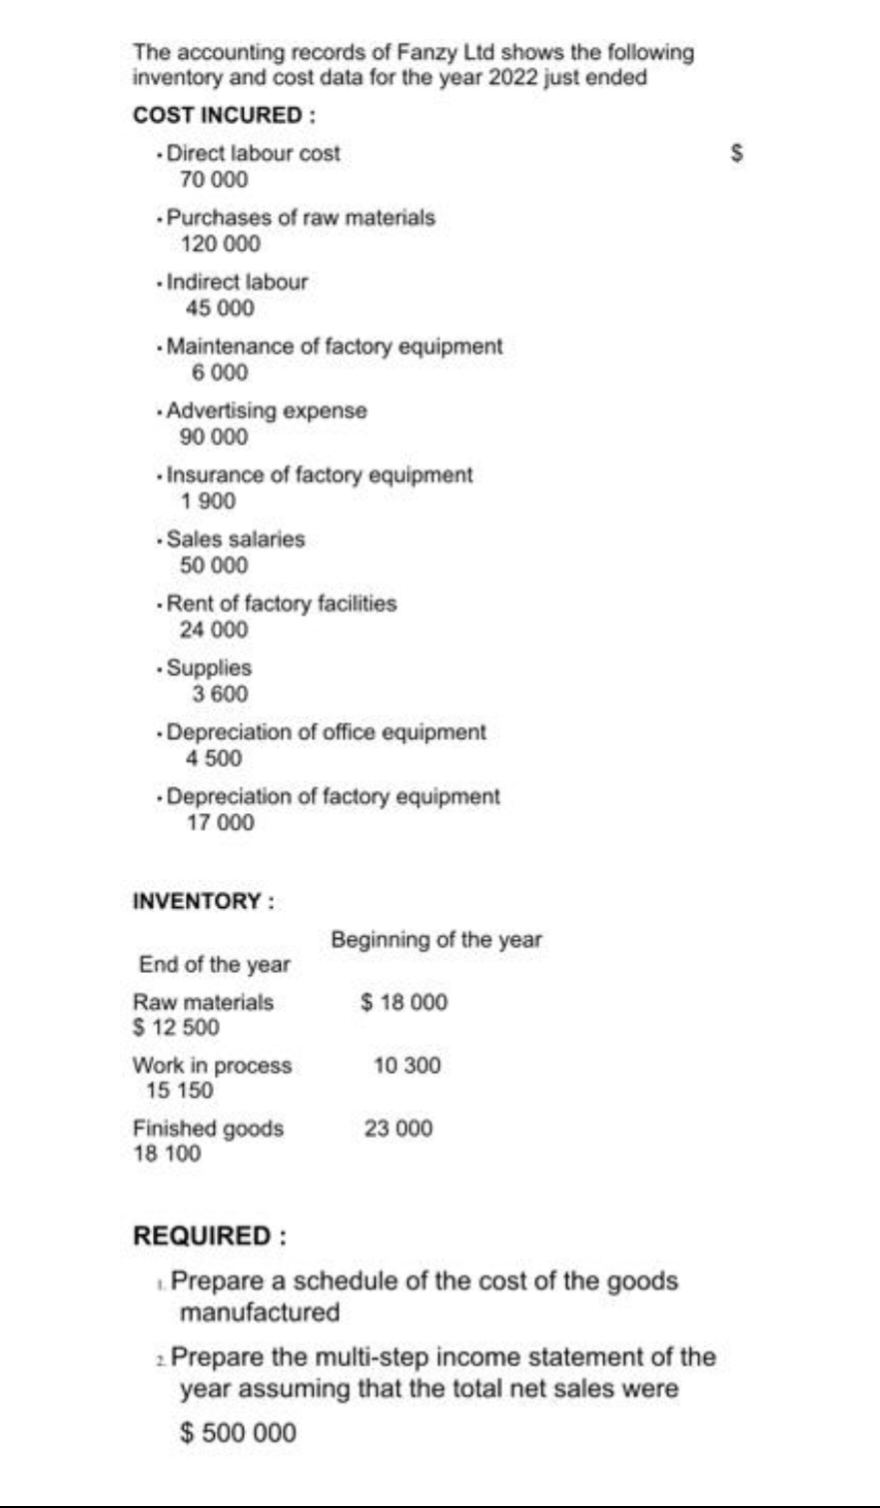 The accounting records of Fanzy Ltd shows the following
inventory and cost data for the year 2022 just ended
COST INCURED:
- Direct labour cost
70 000
Purchases of raw materials
120 000
.Indirect labour
45.000
- Maintenance of factory equipment
6 000
Advertising expense
90 000
Insurance of factory equipment
1.900
-Sales salaries
50 000
-Rent of factory facilities
24 000
.Supplies
3600
Depreciation of office equipment
4 500
Depreciation of factory equipment
17 000
INVENTORY :
End of the year
Raw materials
$ 12 500
Work in process
15 150
Finished goods
18 100
Beginning of the year
$ 18 000
10 300
23 000
REQUIRED:
Prepare a schedule of the cost of the goods
manufactured
2. Prepare the multi-step income statement of the
year assuming that the total net sales were
$ 500 000